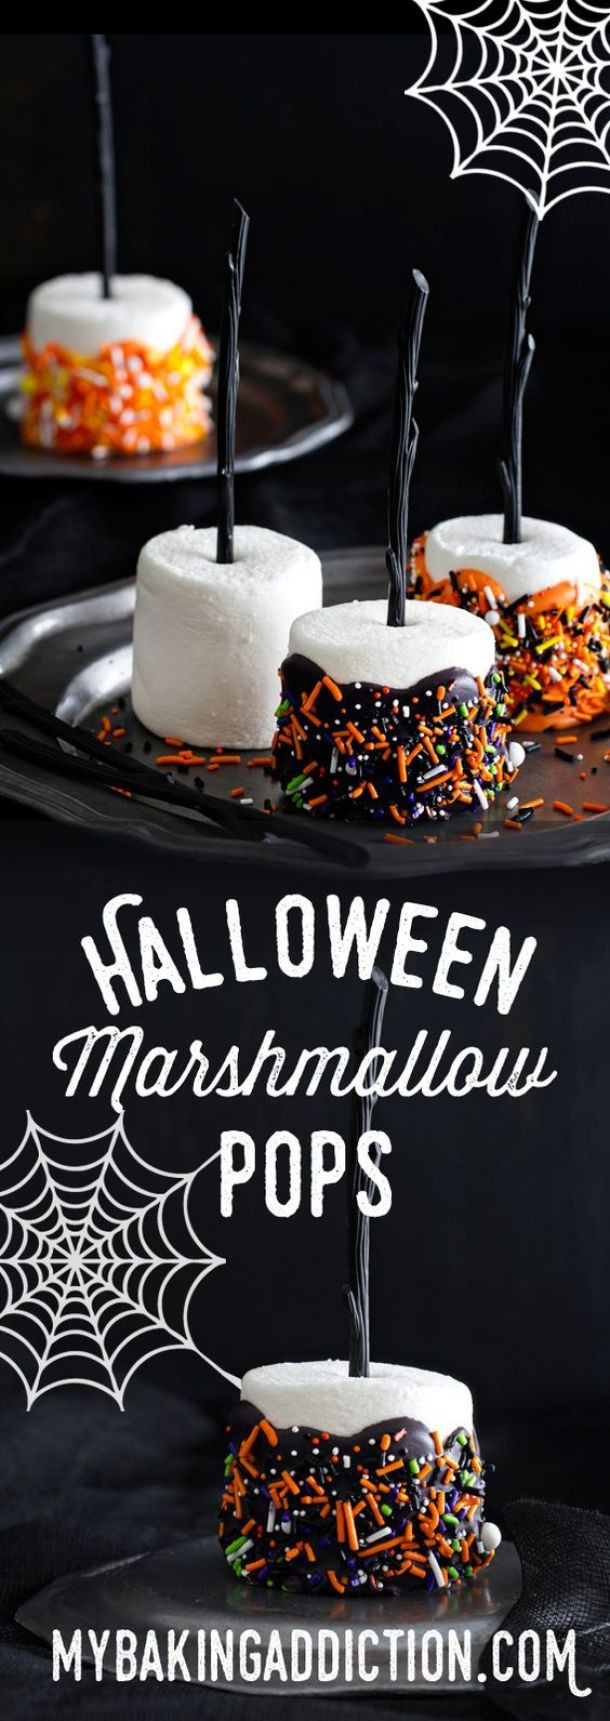 Halloween Party Desserts Ideas
 The BEST Halloween Party Recipes Spooktacular Desserts